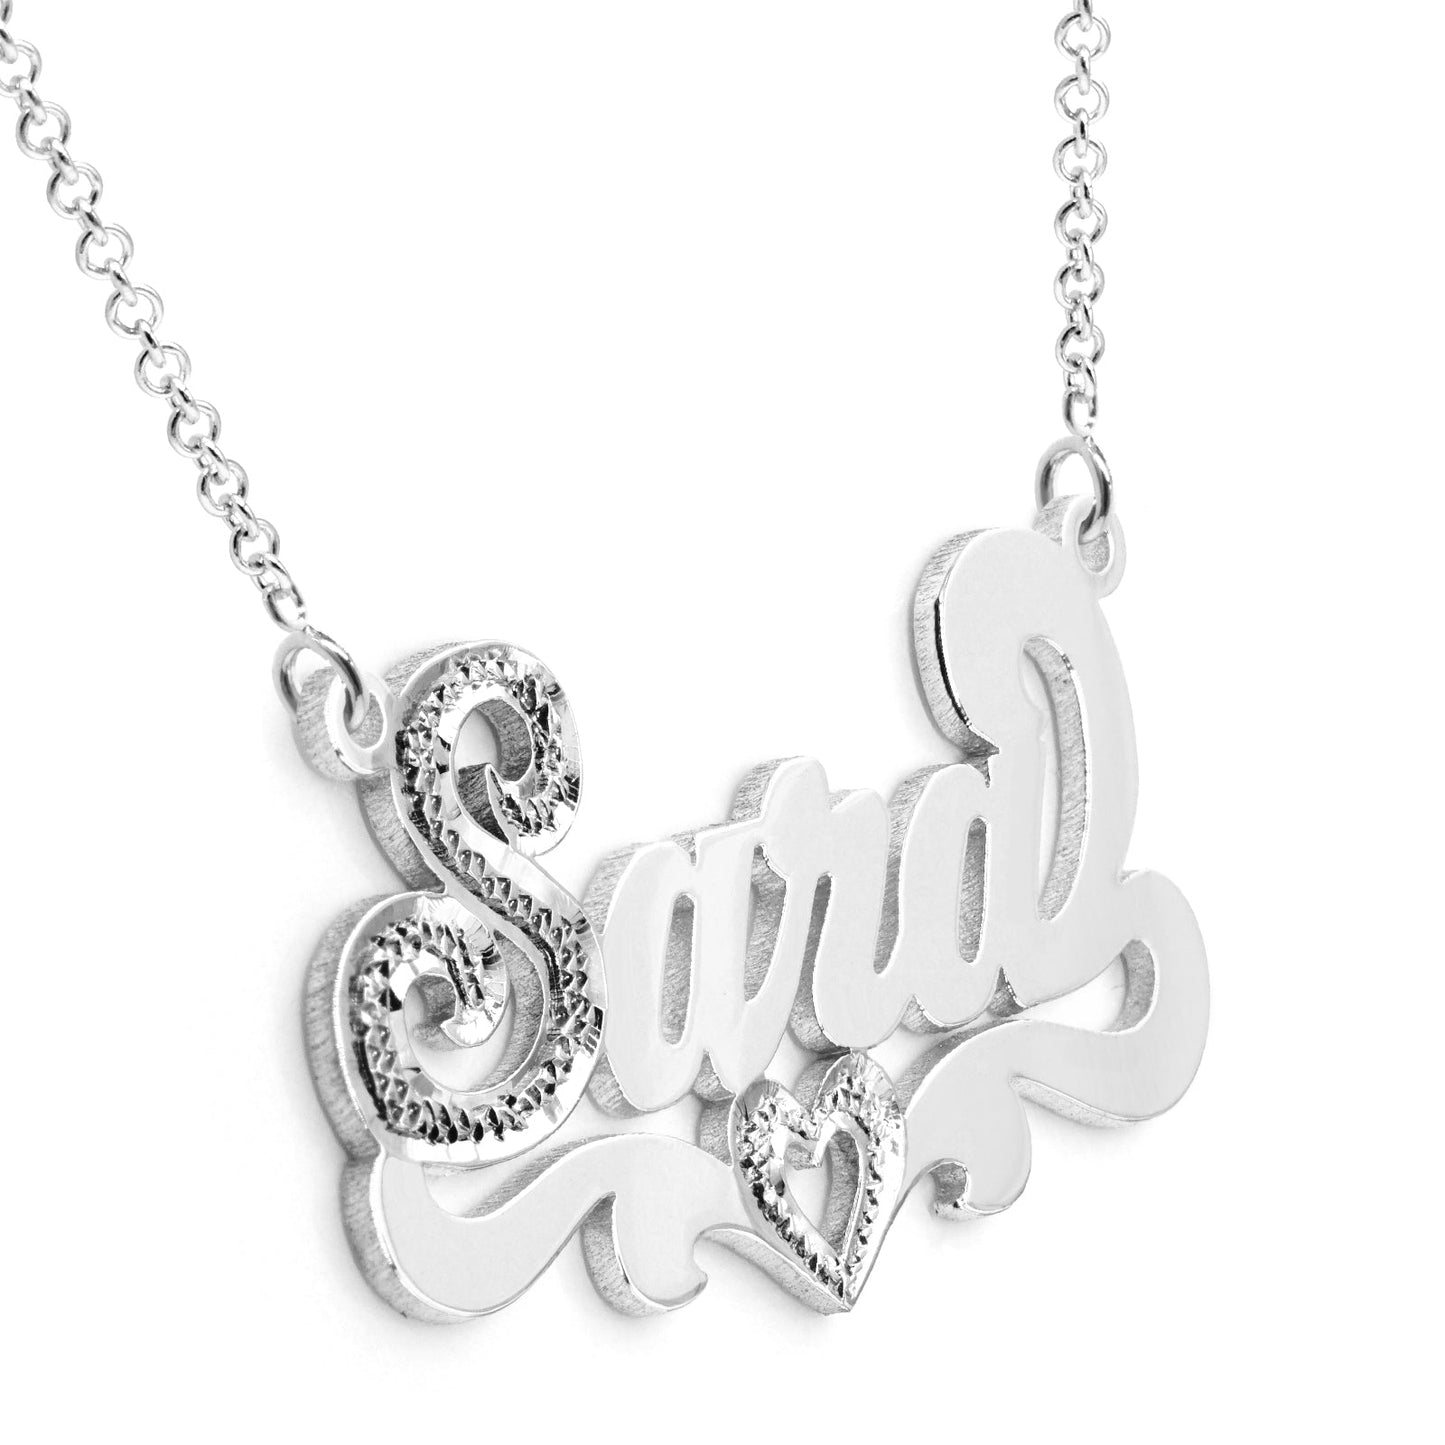 Custom Sterling Silver Nameplate Necklace with Heart First Letter and Heart in Rhodium Sparkle